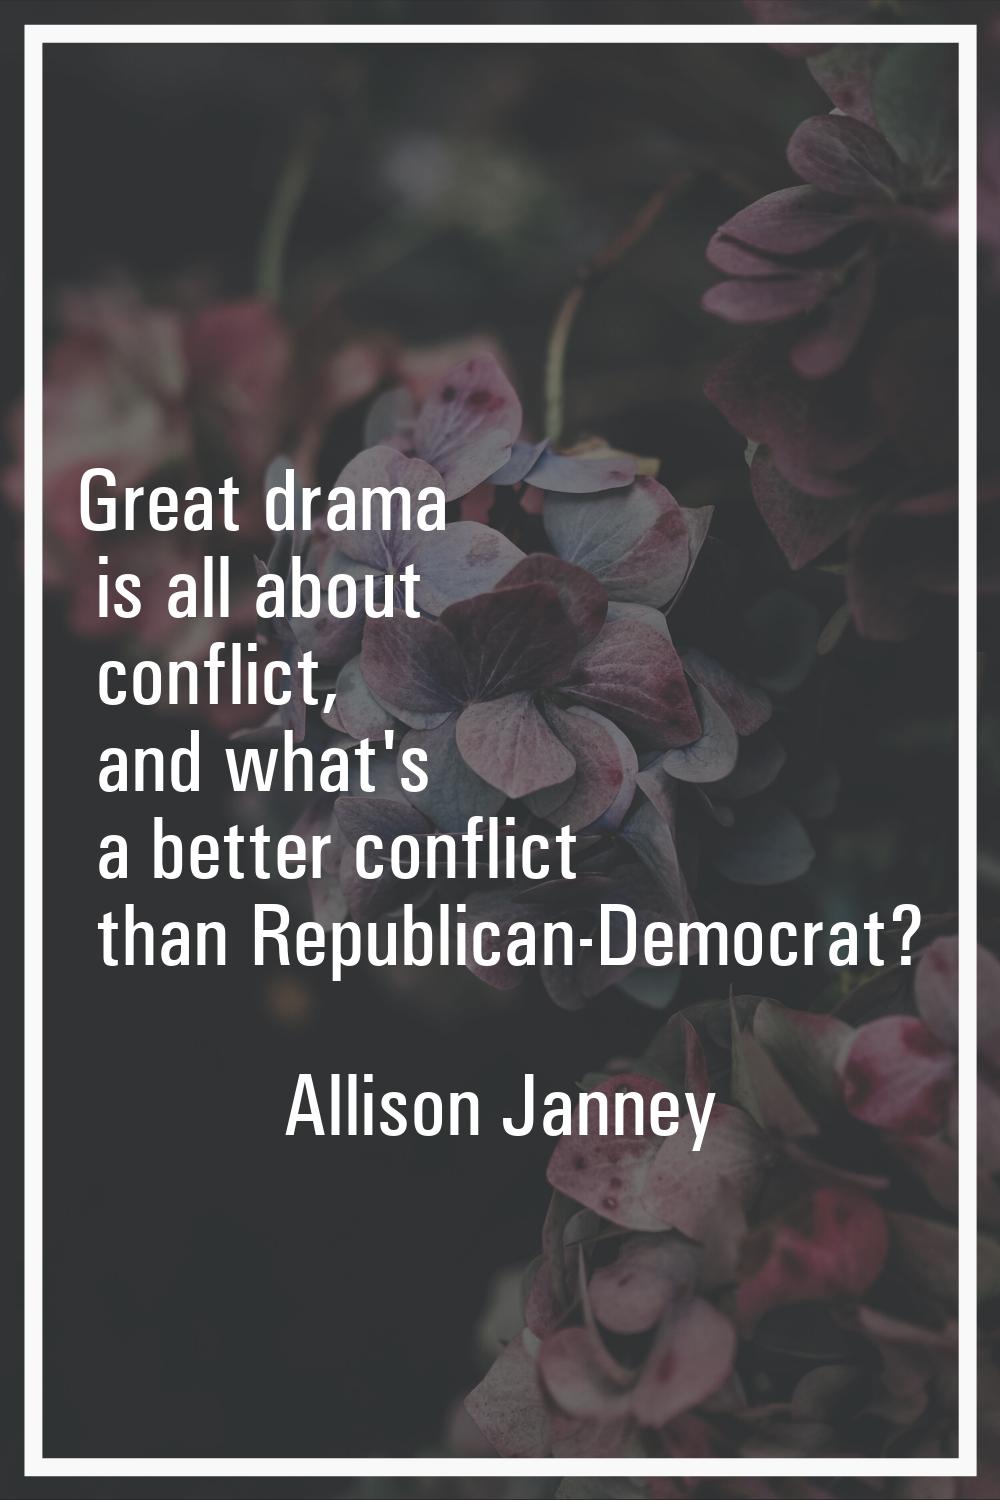 Great drama is all about conflict, and what's a better conflict than Republican-Democrat?